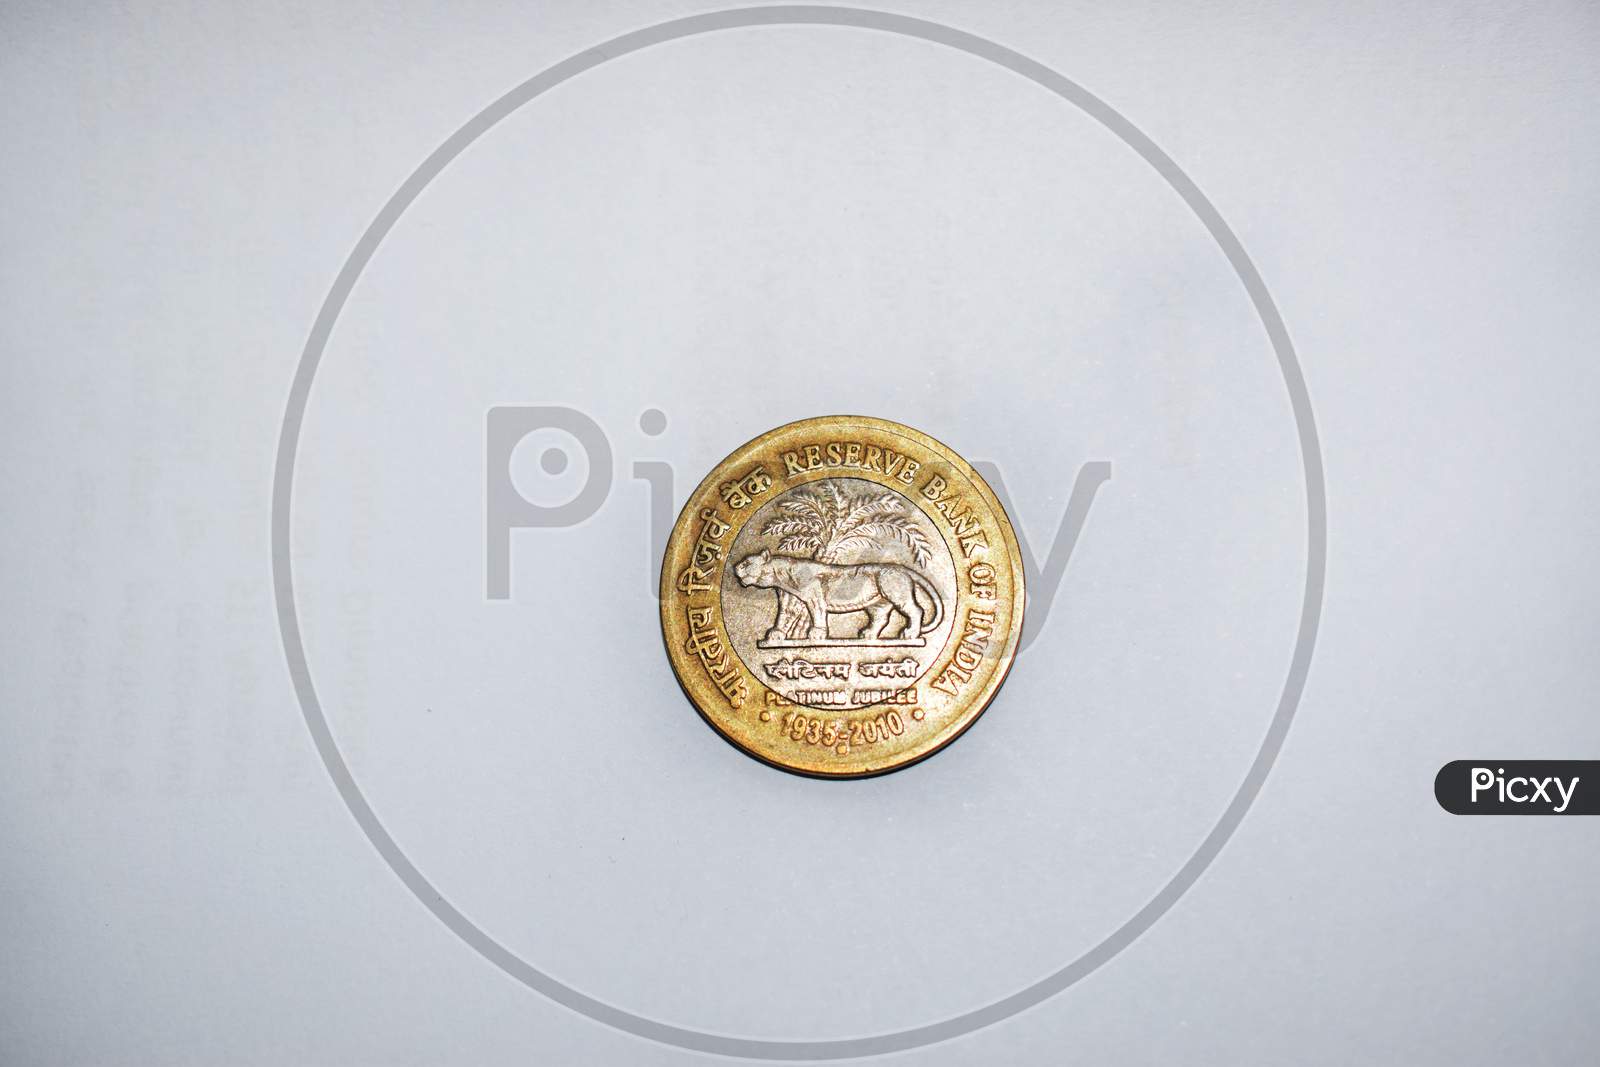 10 rupees coin Reserve Bank Of India Platinum Jubilee 1935-2010